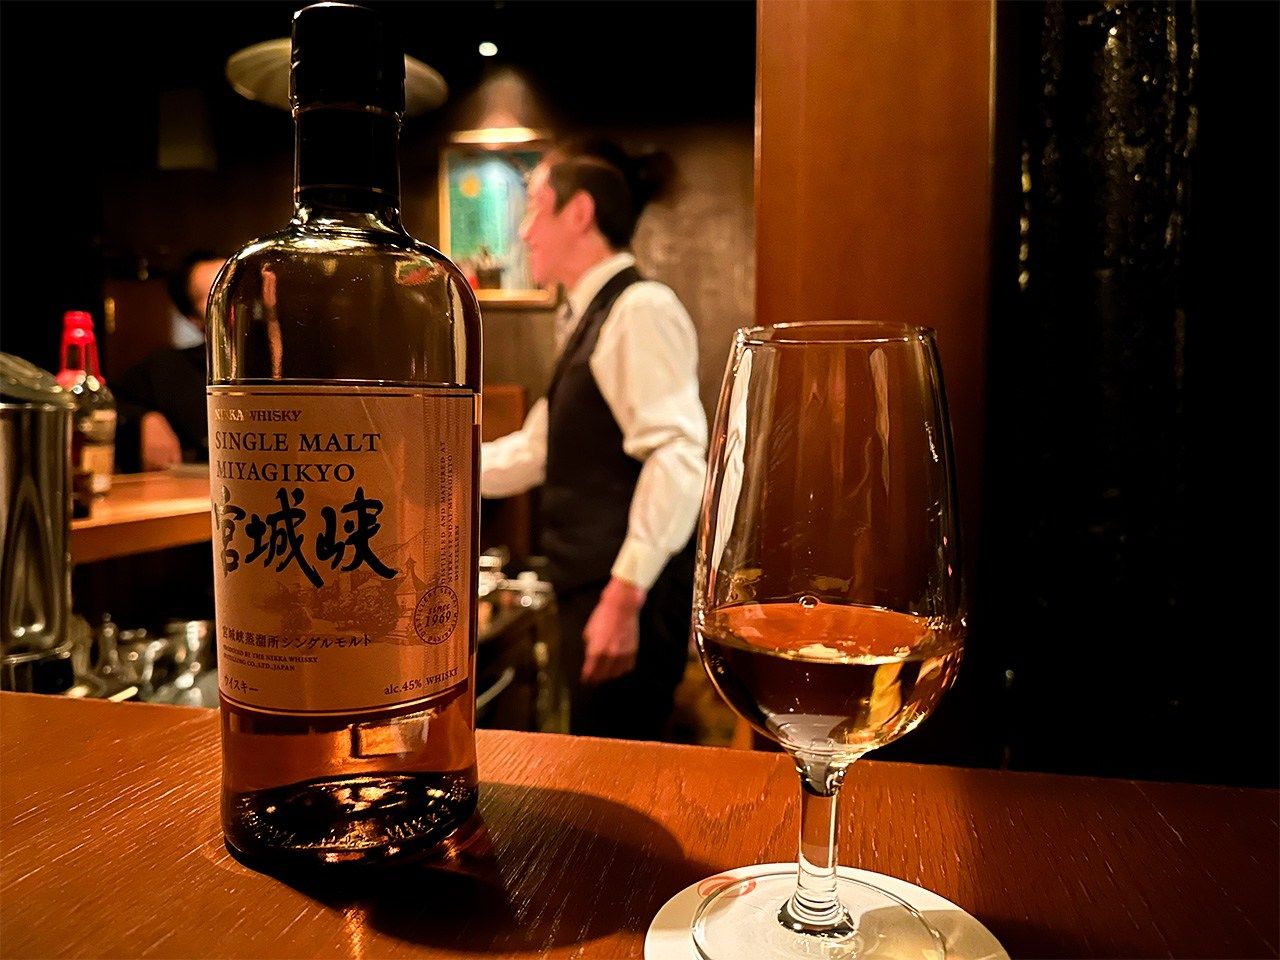 Bar Yū in Ginza, Tokyo, on January 17, 2023. Japanese whisky is popular both at home and overseas. (© Izumi Nobumichi)